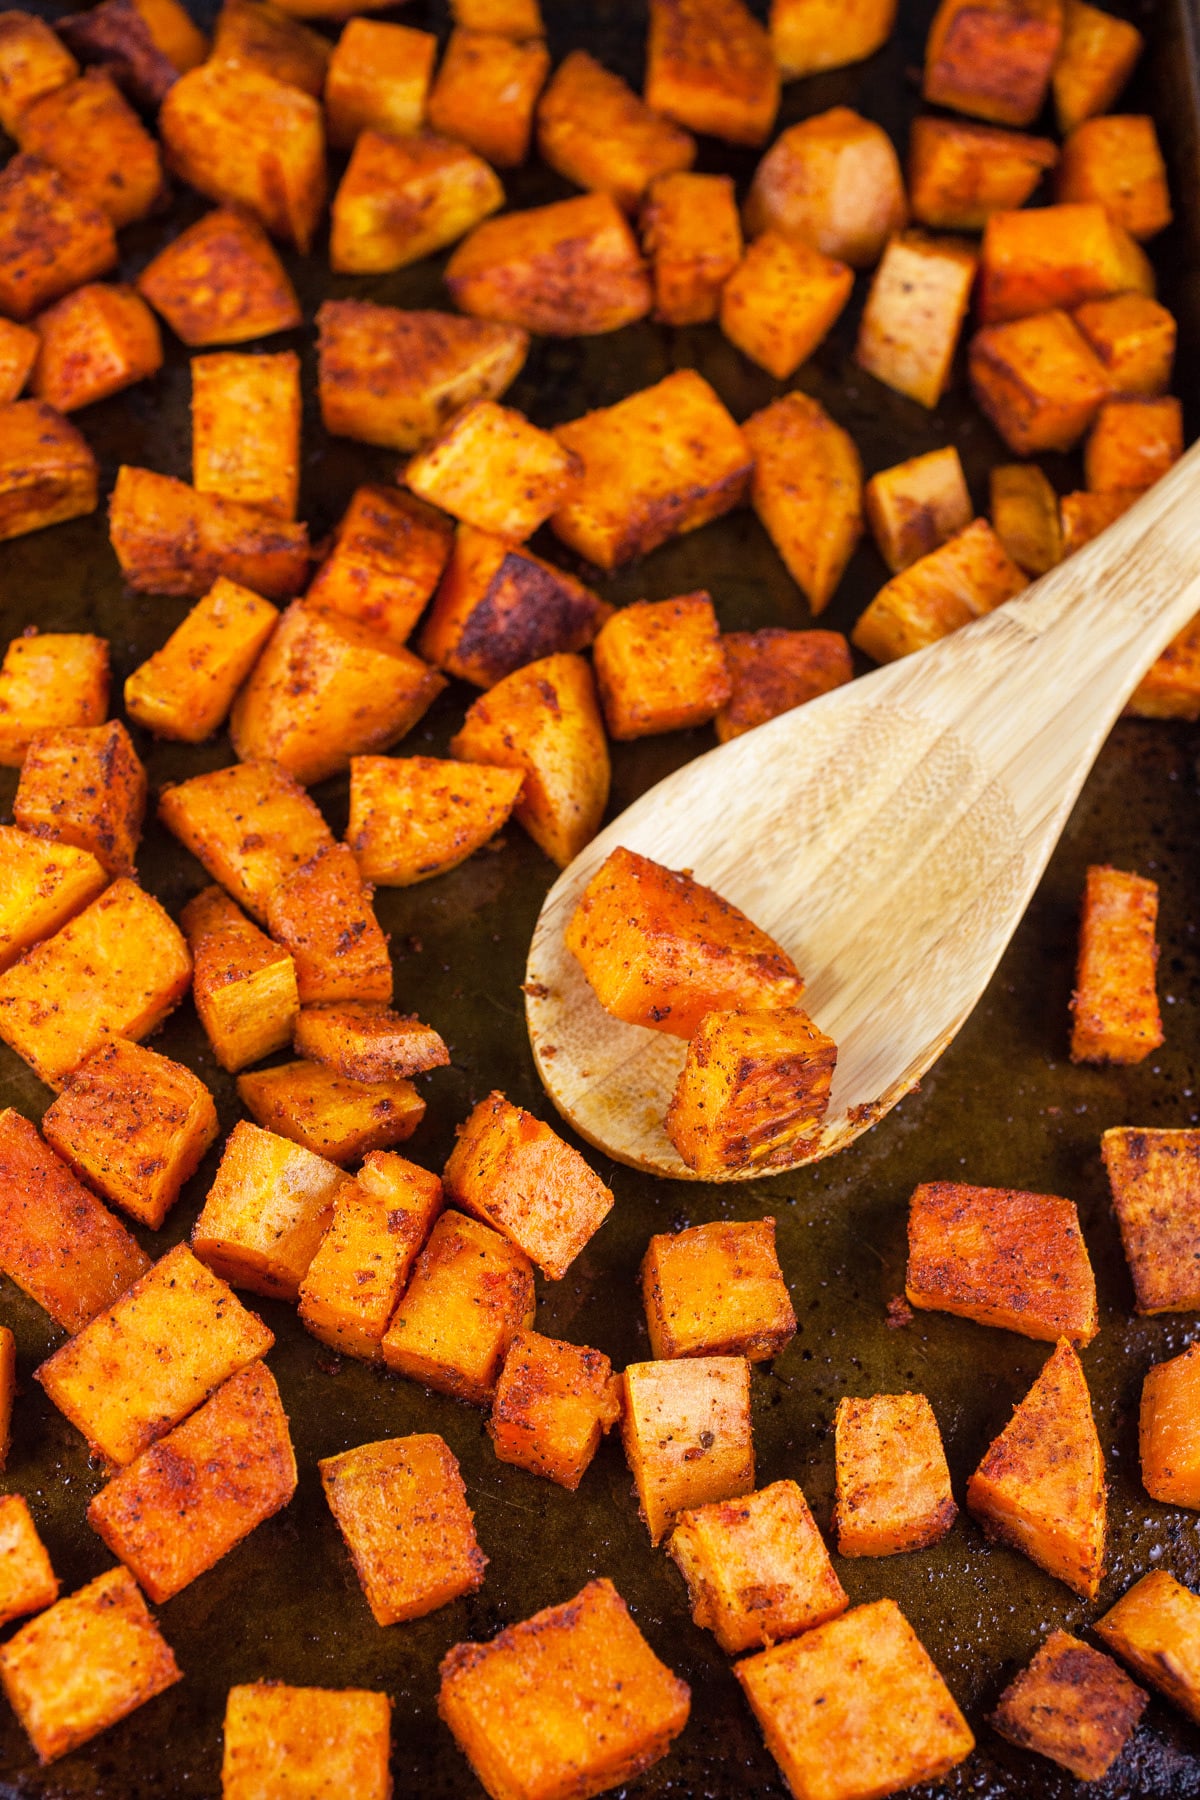 Roasted diced sweet potatoes on baking sheet with wooden spoon.